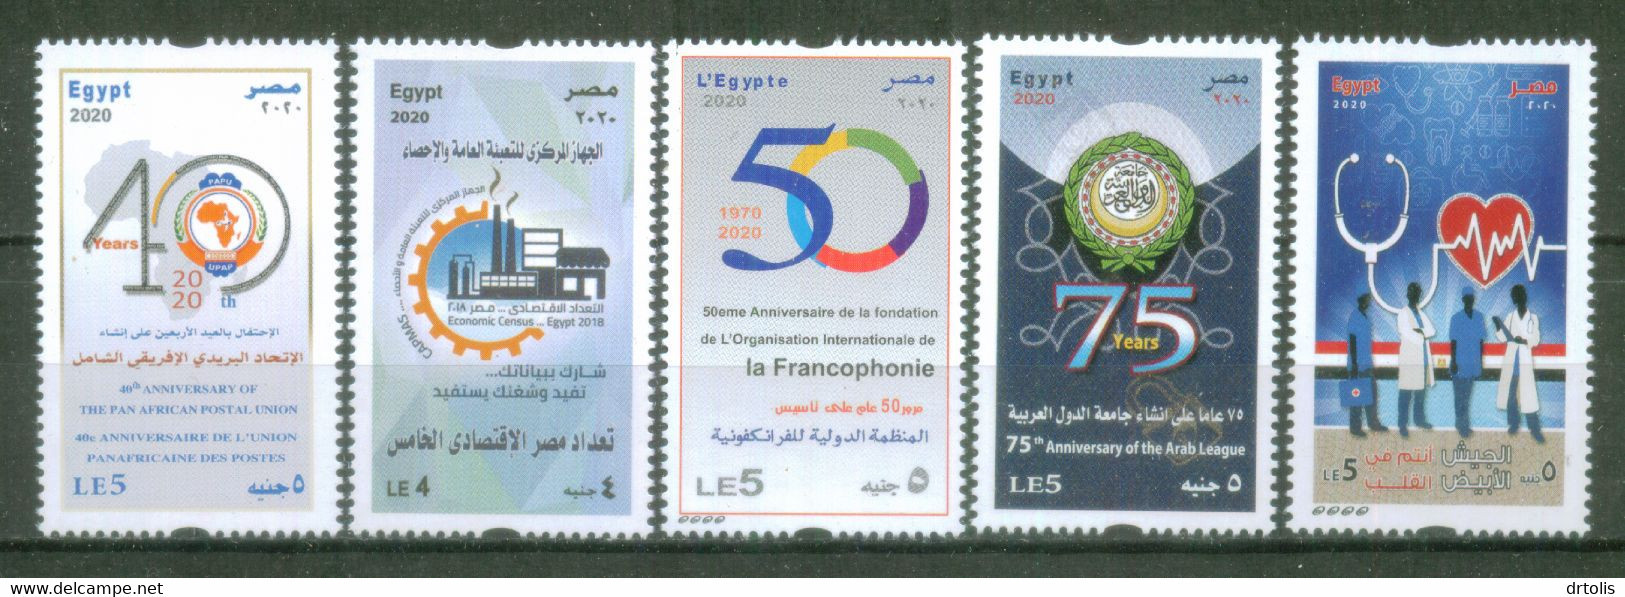 EGYPT / 2020 / COMPLETE YEAR ISSUES / MNH / VF - Neufs